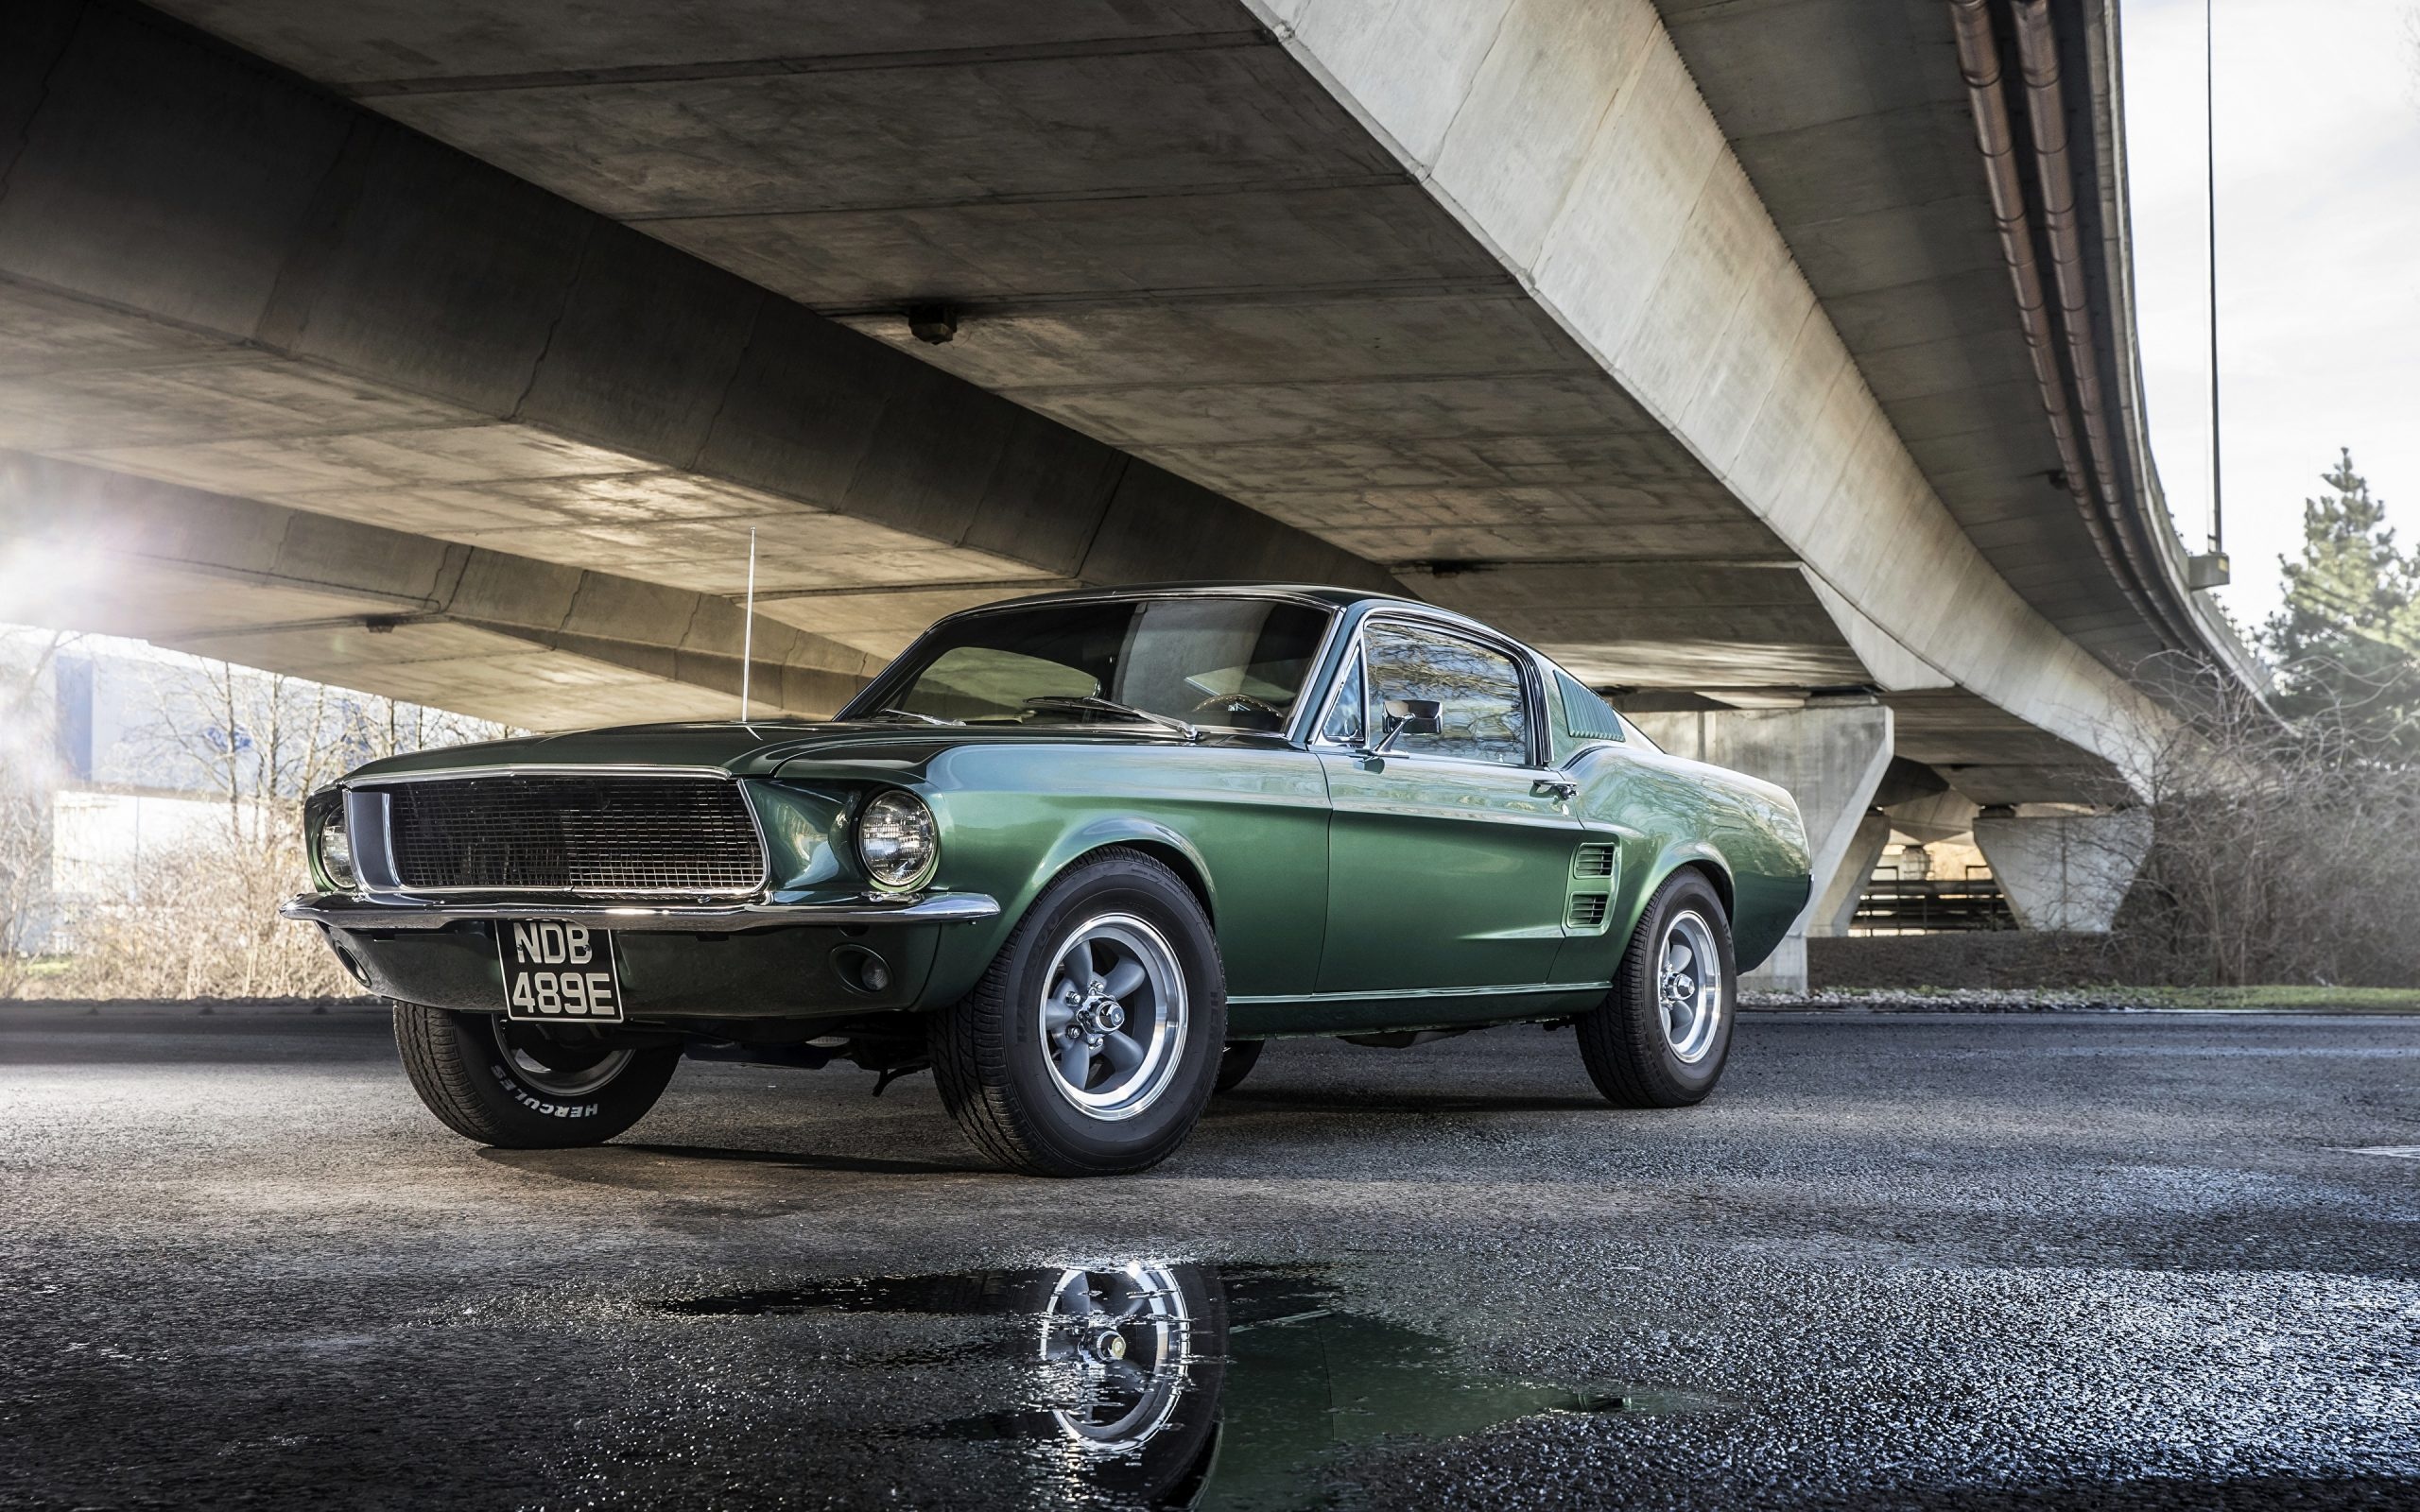 1967 Mustang, Muscle car classic, Iconic design, Vintage Mustang, Auto enthusiast, 2560x1600 HD Desktop